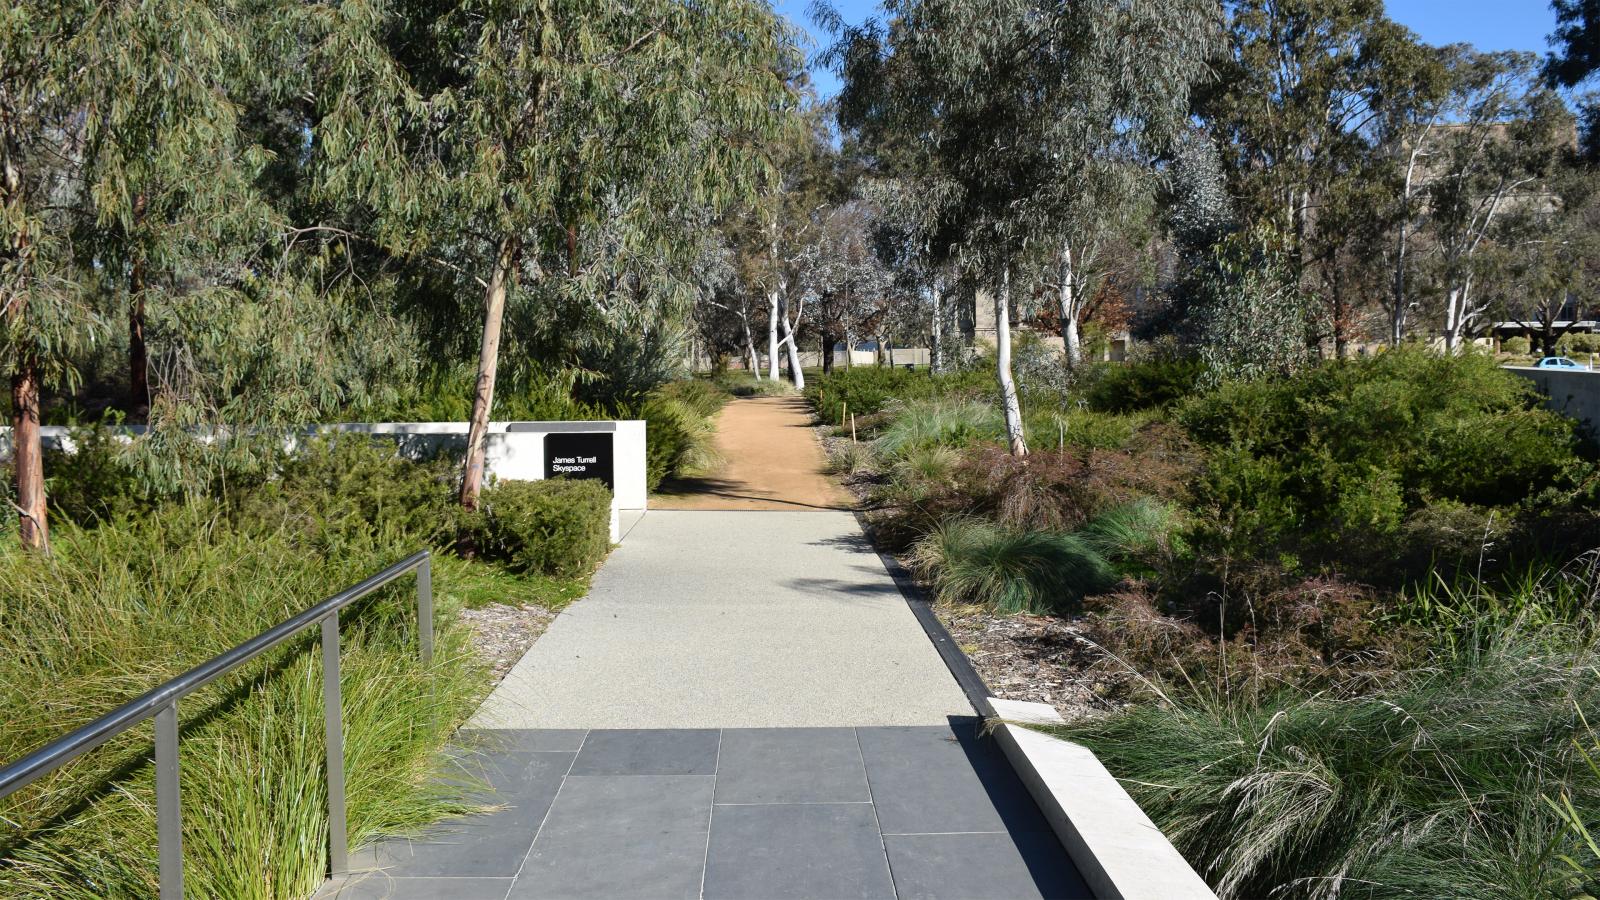 A paved pathway extends into a lush garden filled with various green shrubs and trees. A small sign on the left reads "Main Garden Path." The path is partially shaded by tall trees and bordered by railings and low vegetation. In the background, a dirt path leads further into the Australian Garden at NGA.